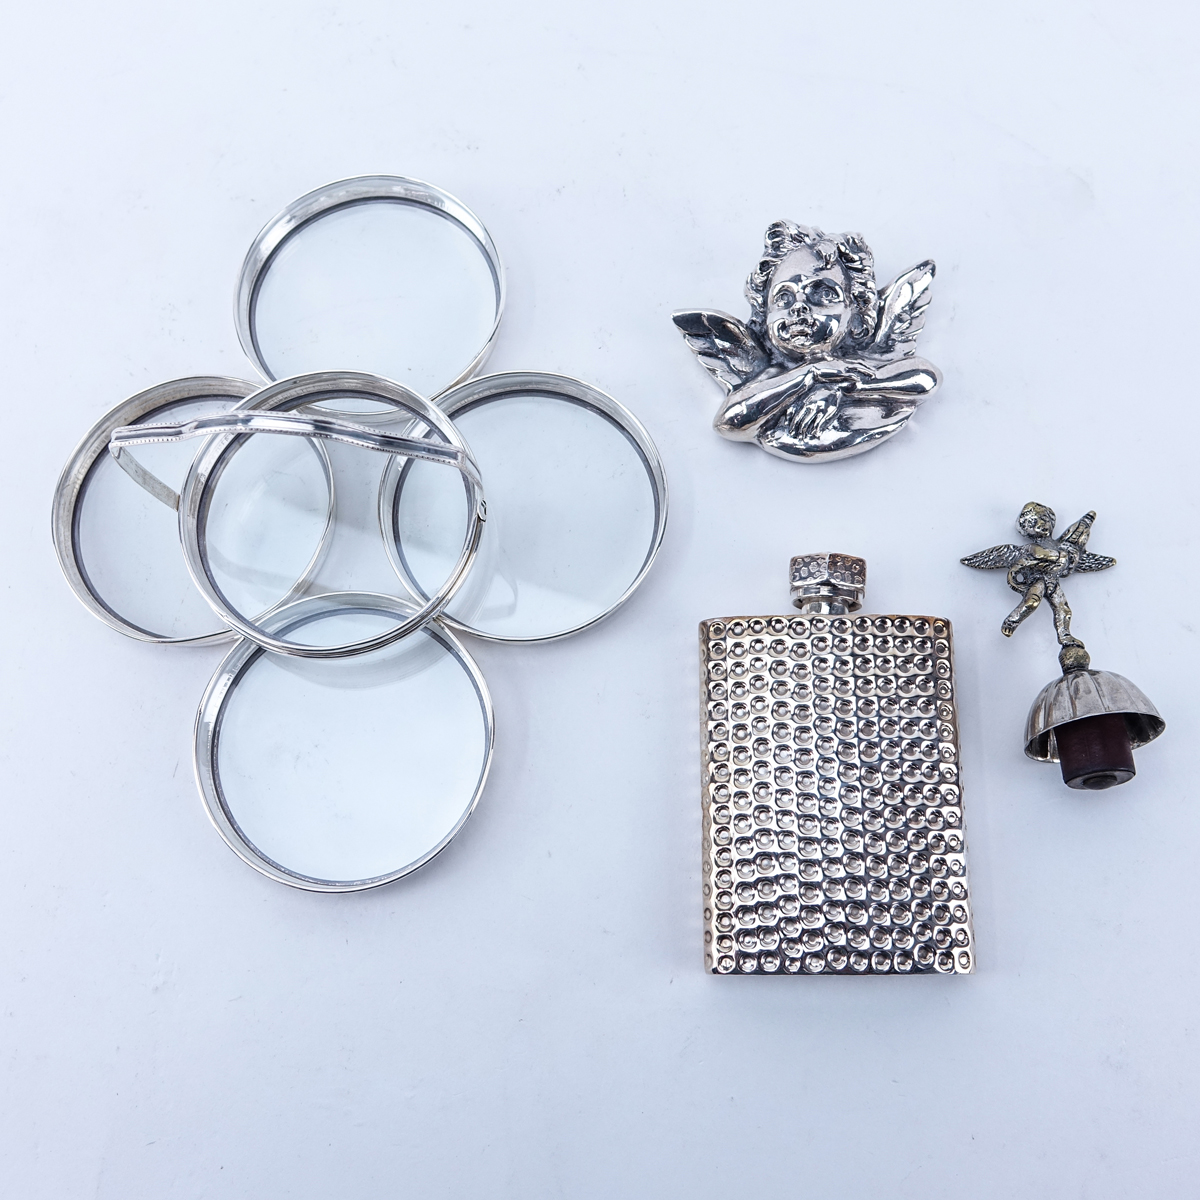 Lot of Silver Accessories. Includes: Mexican silver flask, 5 pieces silver and glass coaster set, Henryk Winograd sterling clad paperweight, silver plate figural wine stopper.